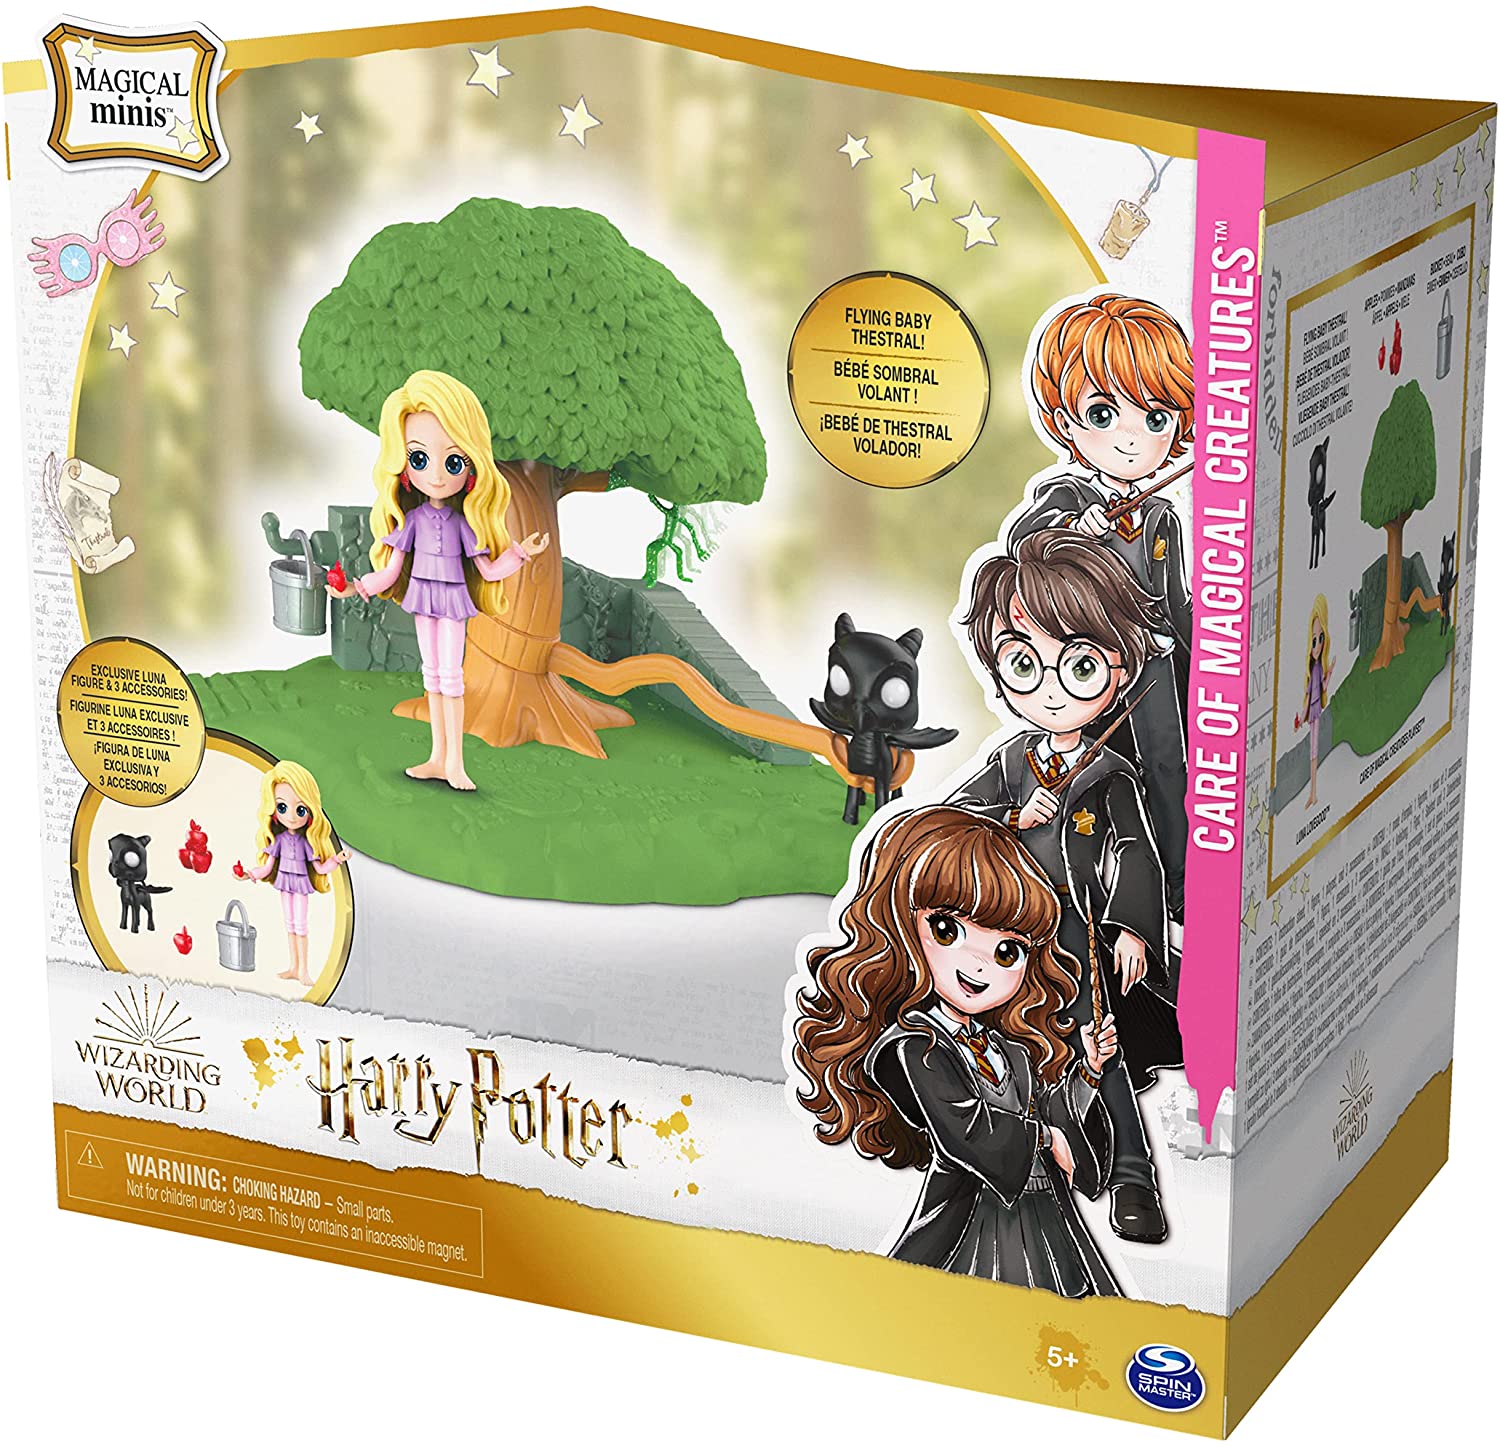 Wizarding World Harry Potter, Magical Minis Care of Magical Creatures Playset w/ Luna Lovegood Figure & Accessories $5.56 + FS w/ Amazon Prime or FS on $25+